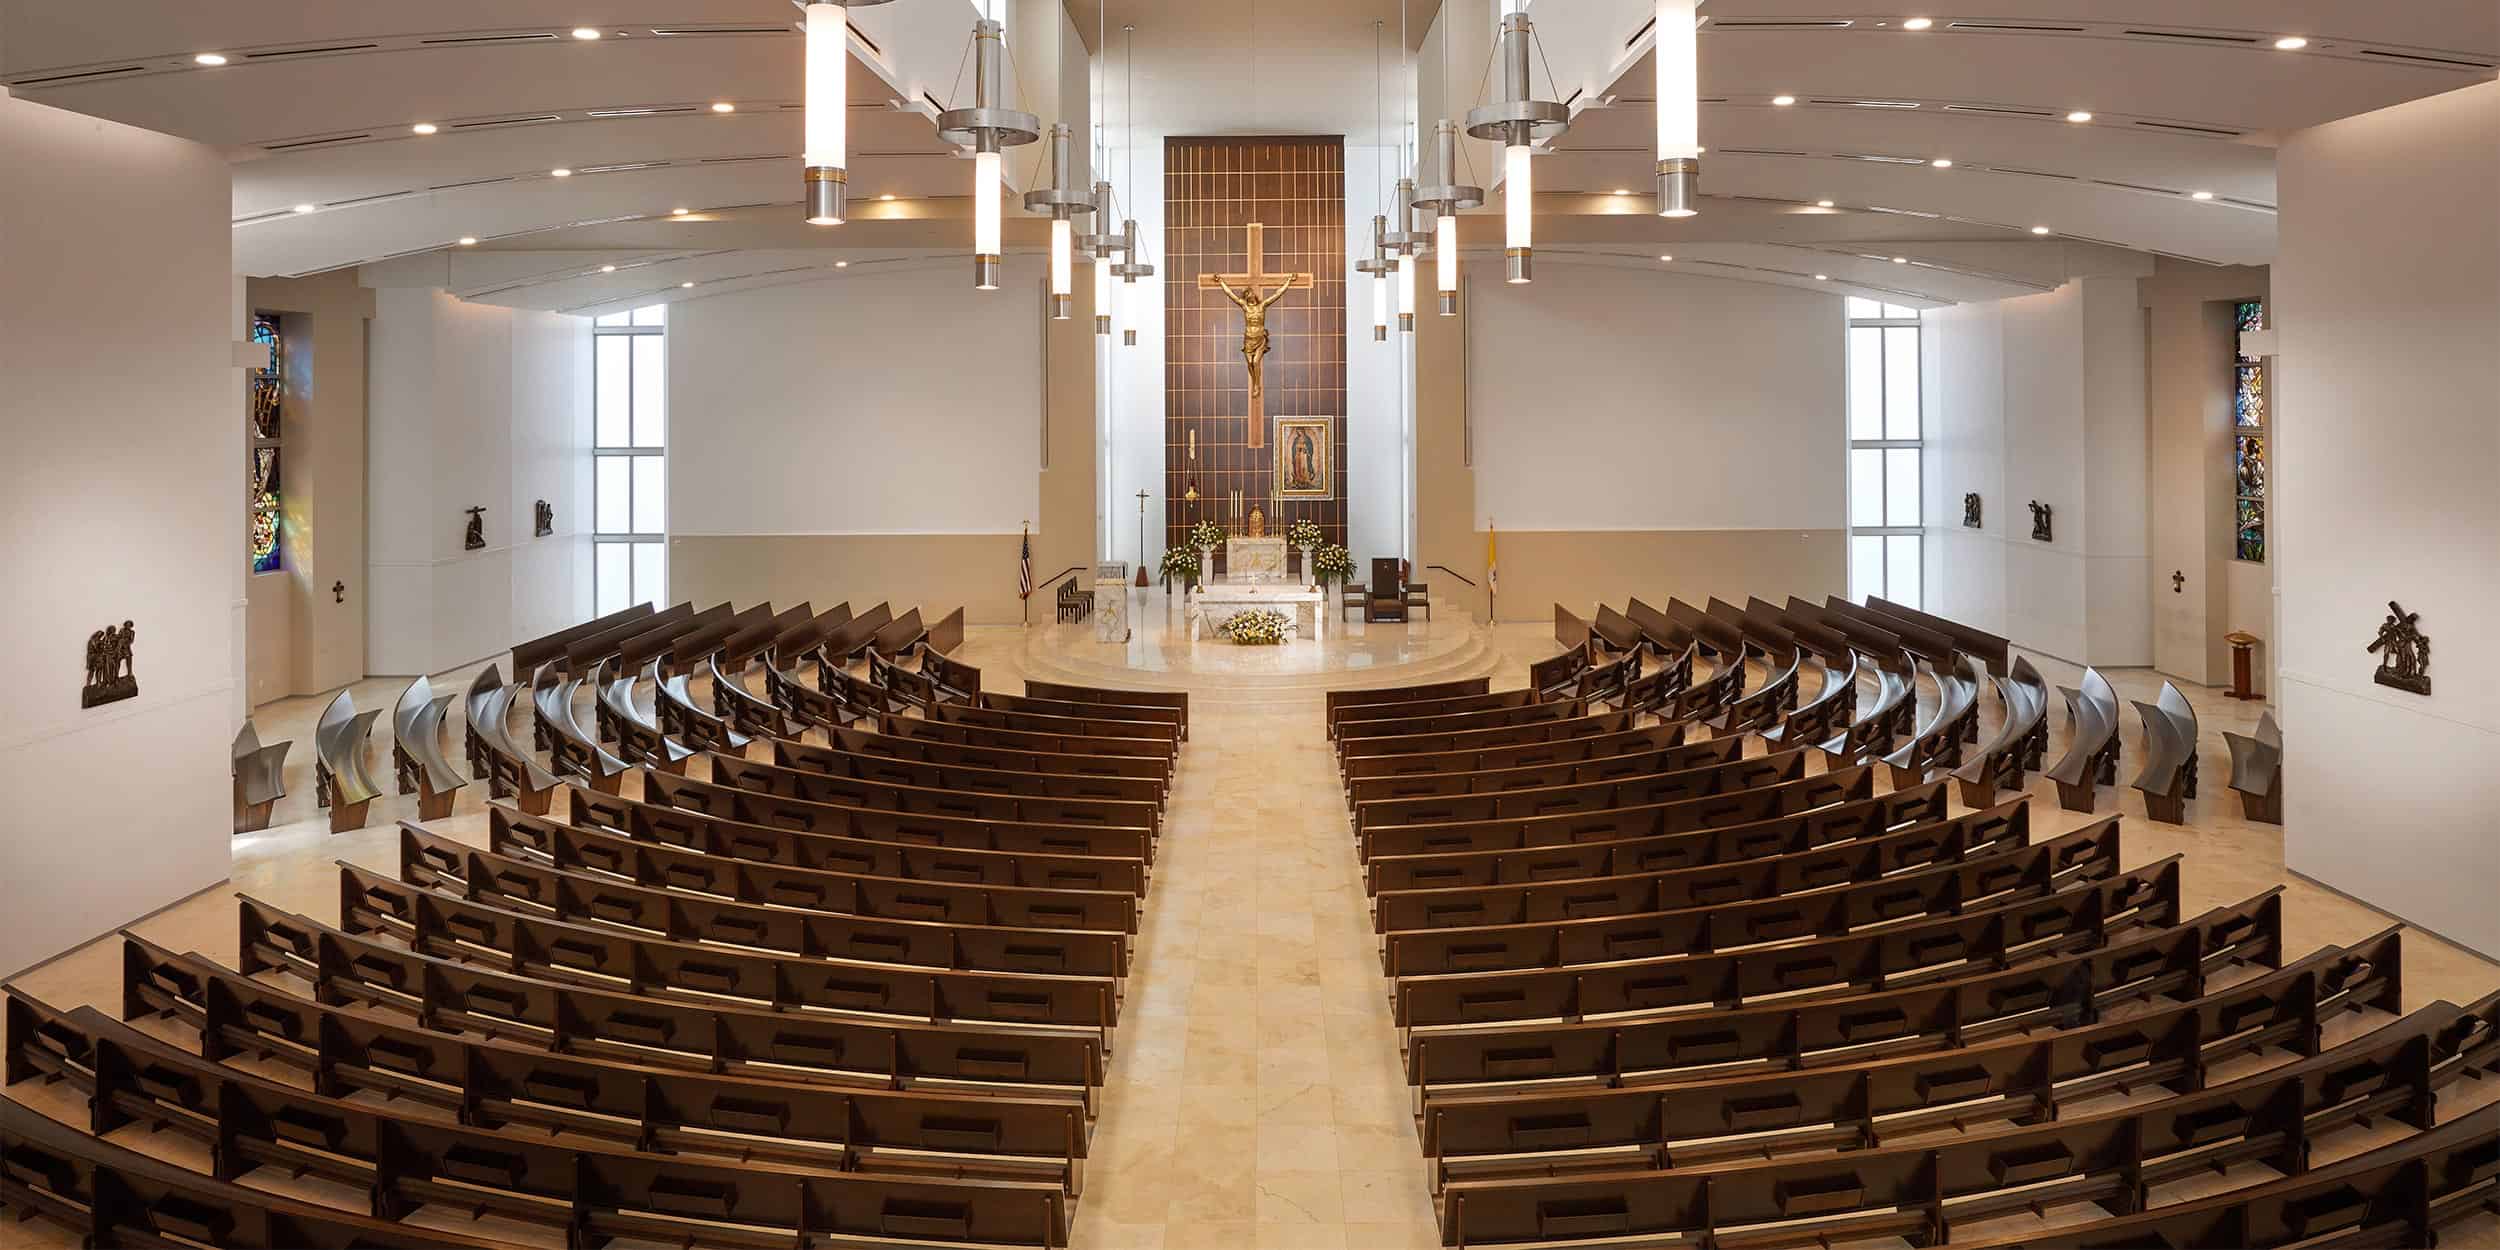 Round radial all wood pews from Sauder in Our Lady of Guadalupe located in Doral, FL